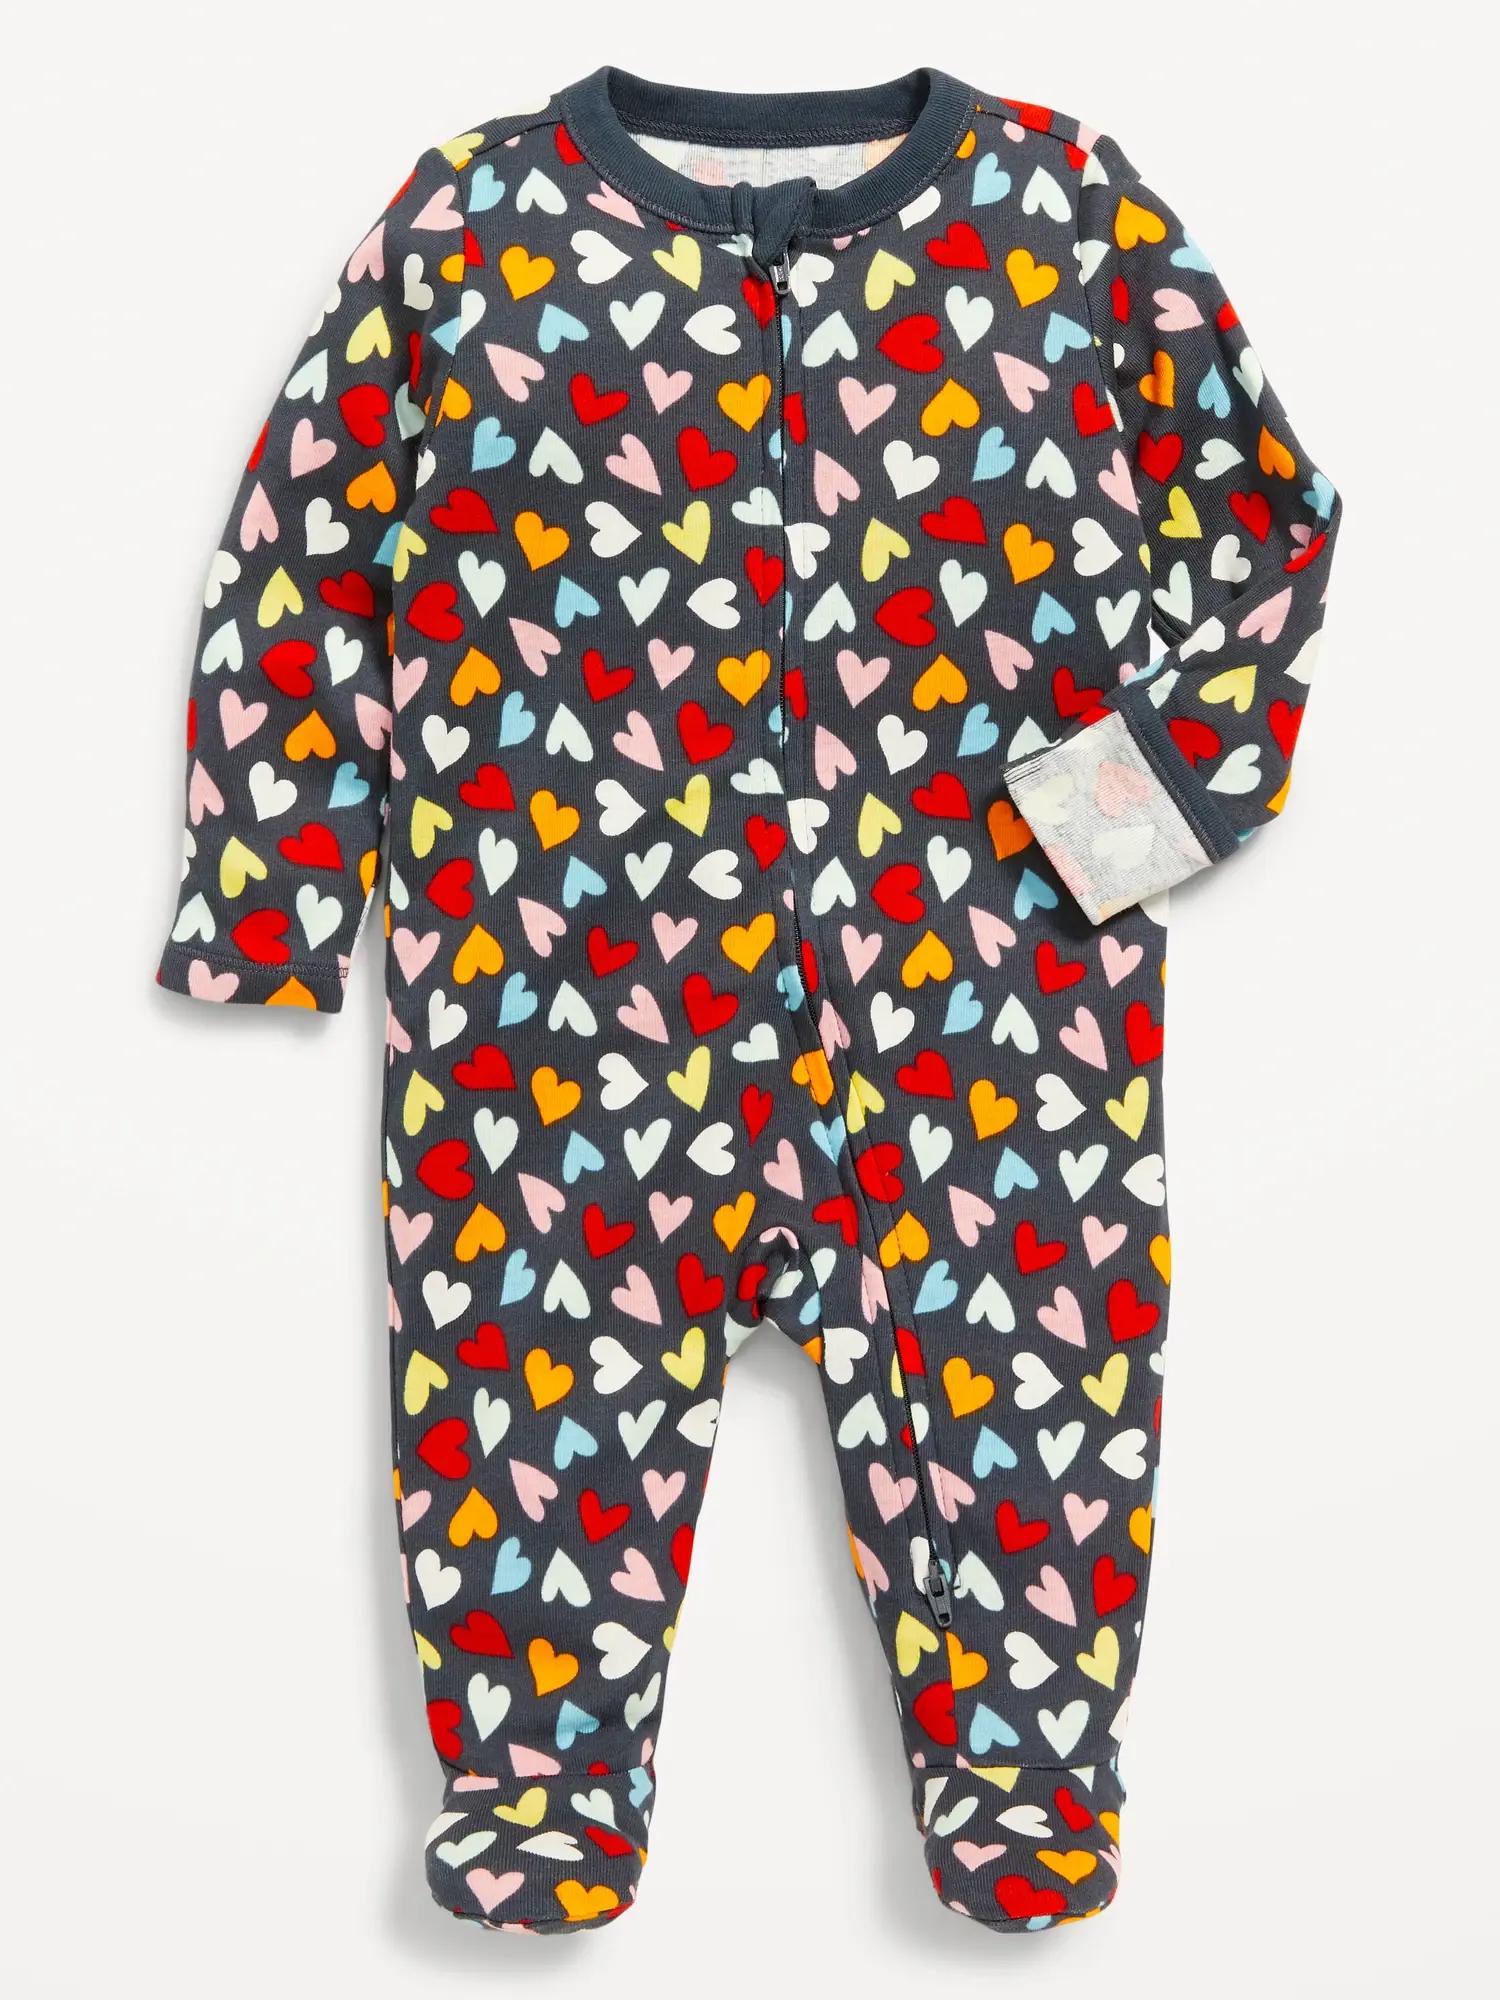 Old Navy Unisex Sleep & Play 2-Way-Zip Footed One-Piece for Baby multi. 1